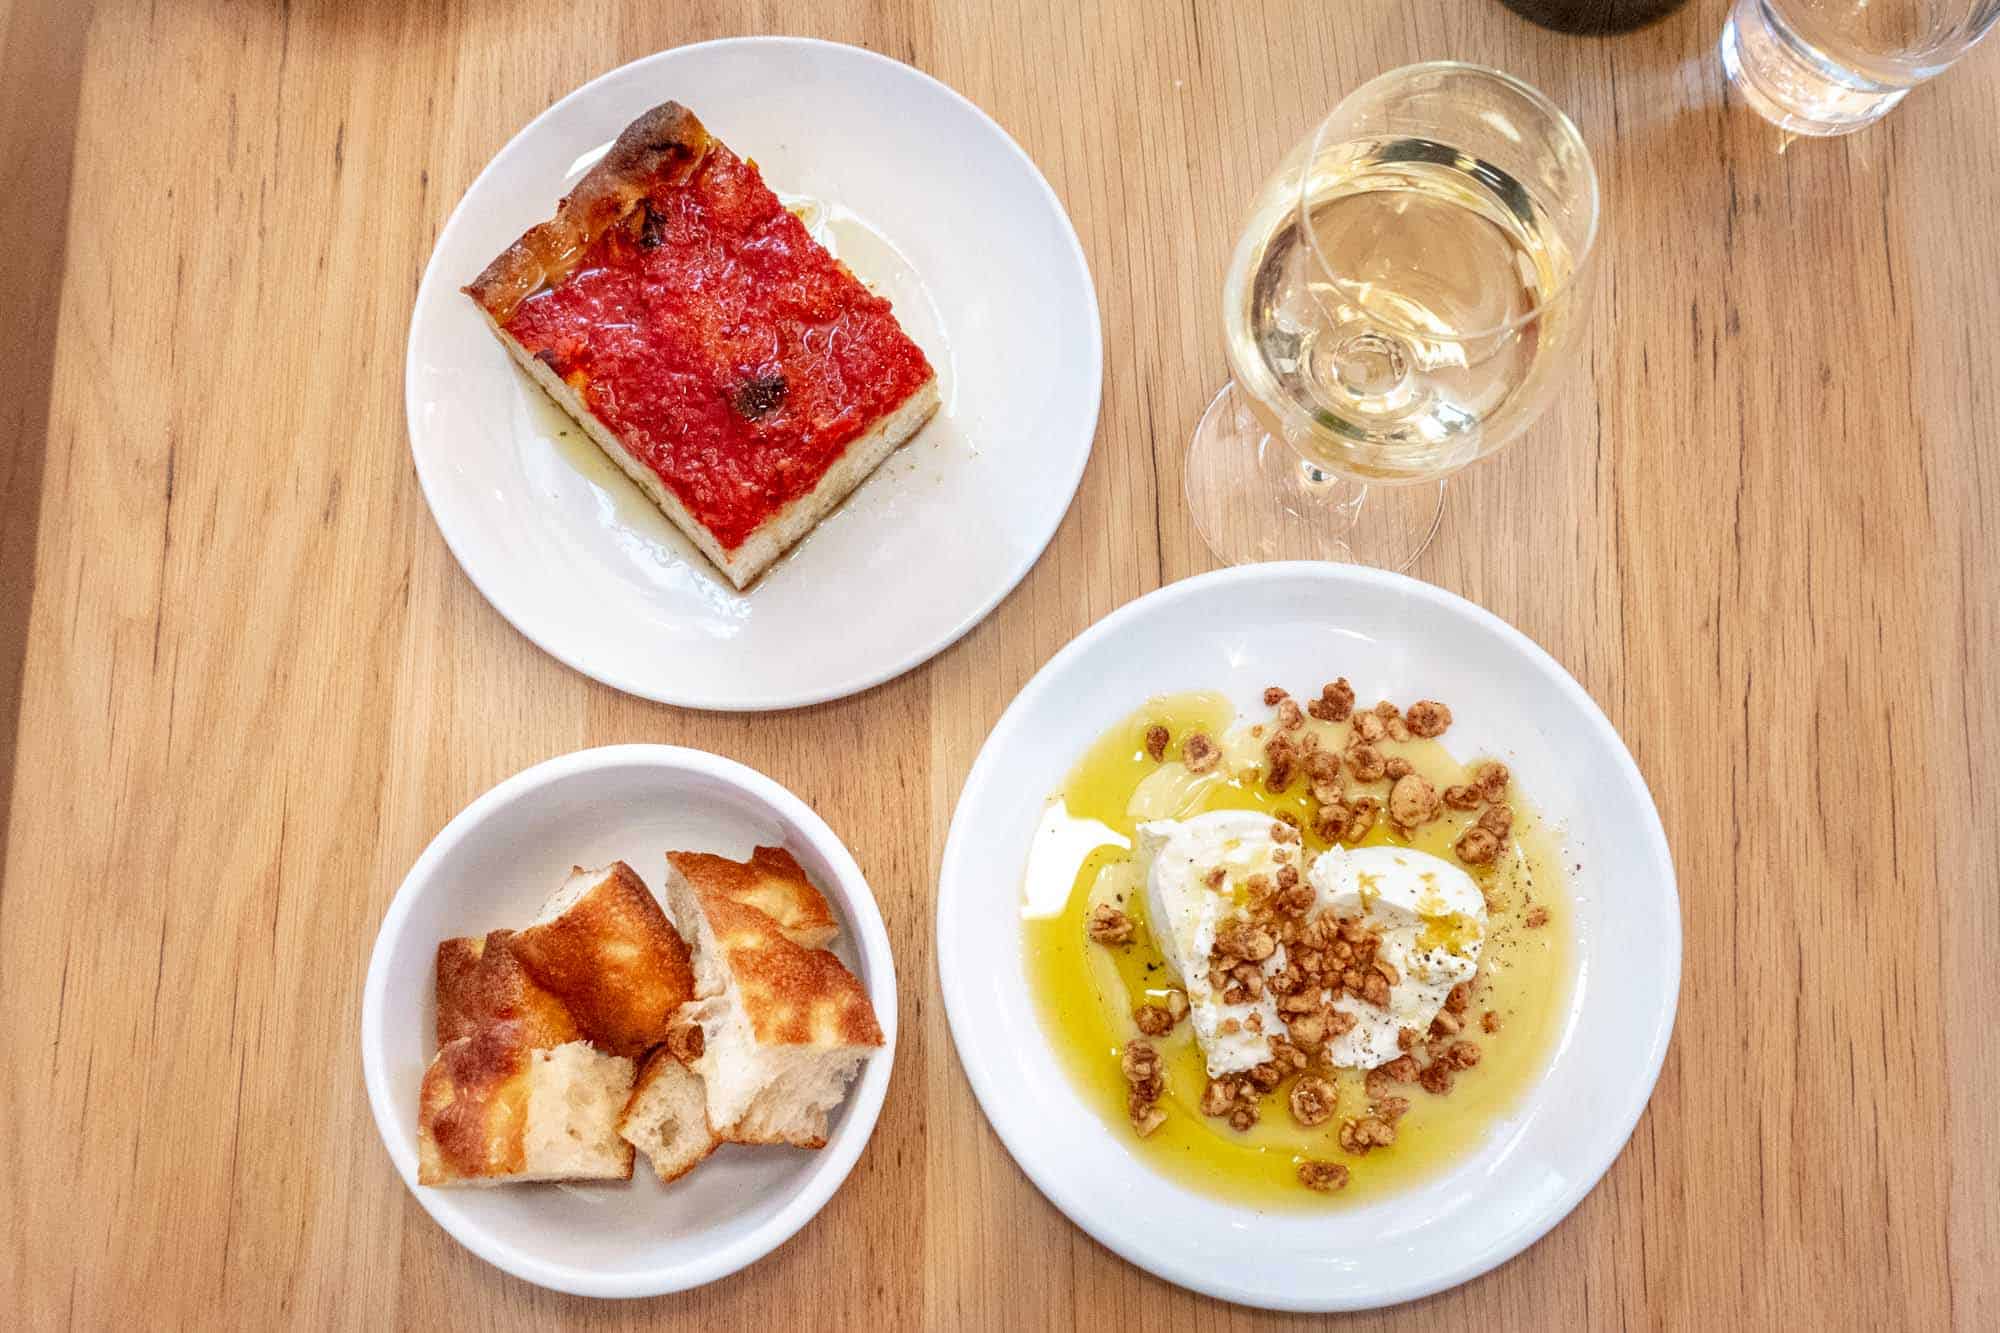 Burrata in olive oil with burrata and tomato pie appetizers with glass of white wine